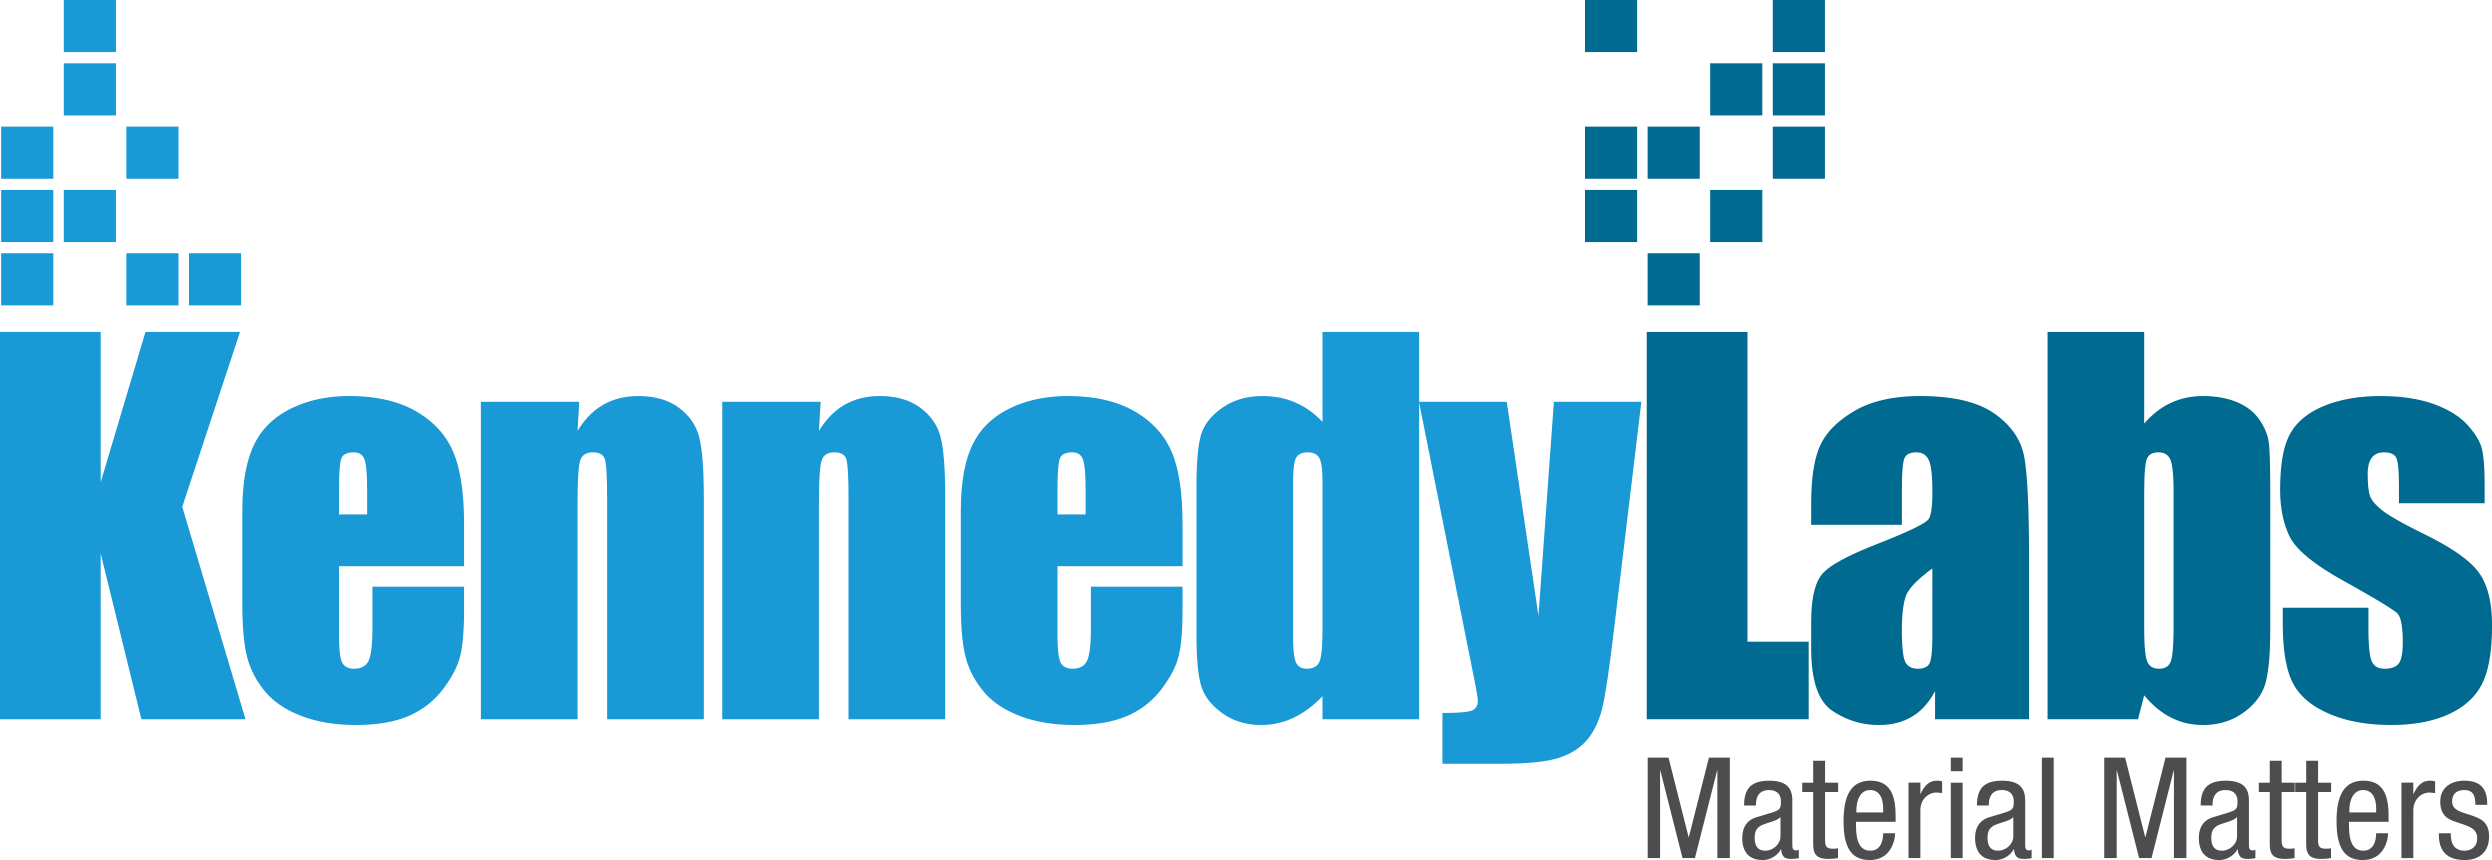 Kennedy Labs, a division of Hub Incorporated LOGO